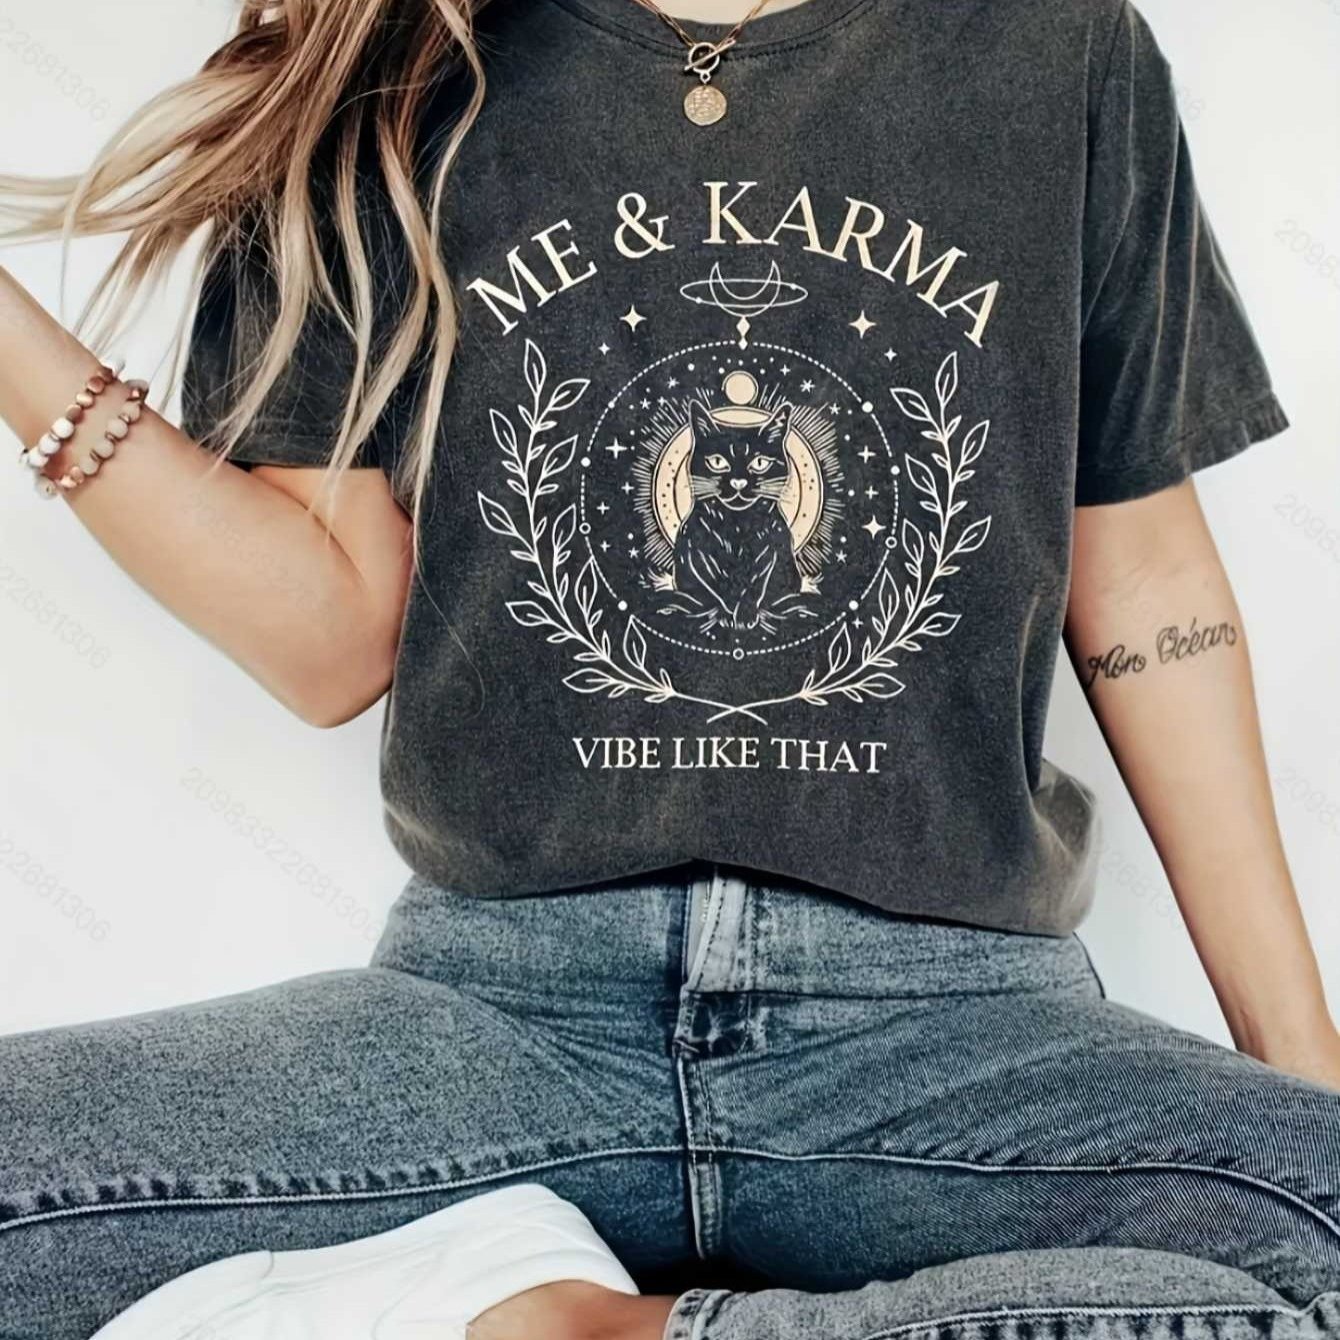 

Me & Karma Cat - Women's Chic Letter Print Tee - Comfy, Casual Short Sleeve Crew Neck T-shirt For Everyday Wear & Stylish Layering